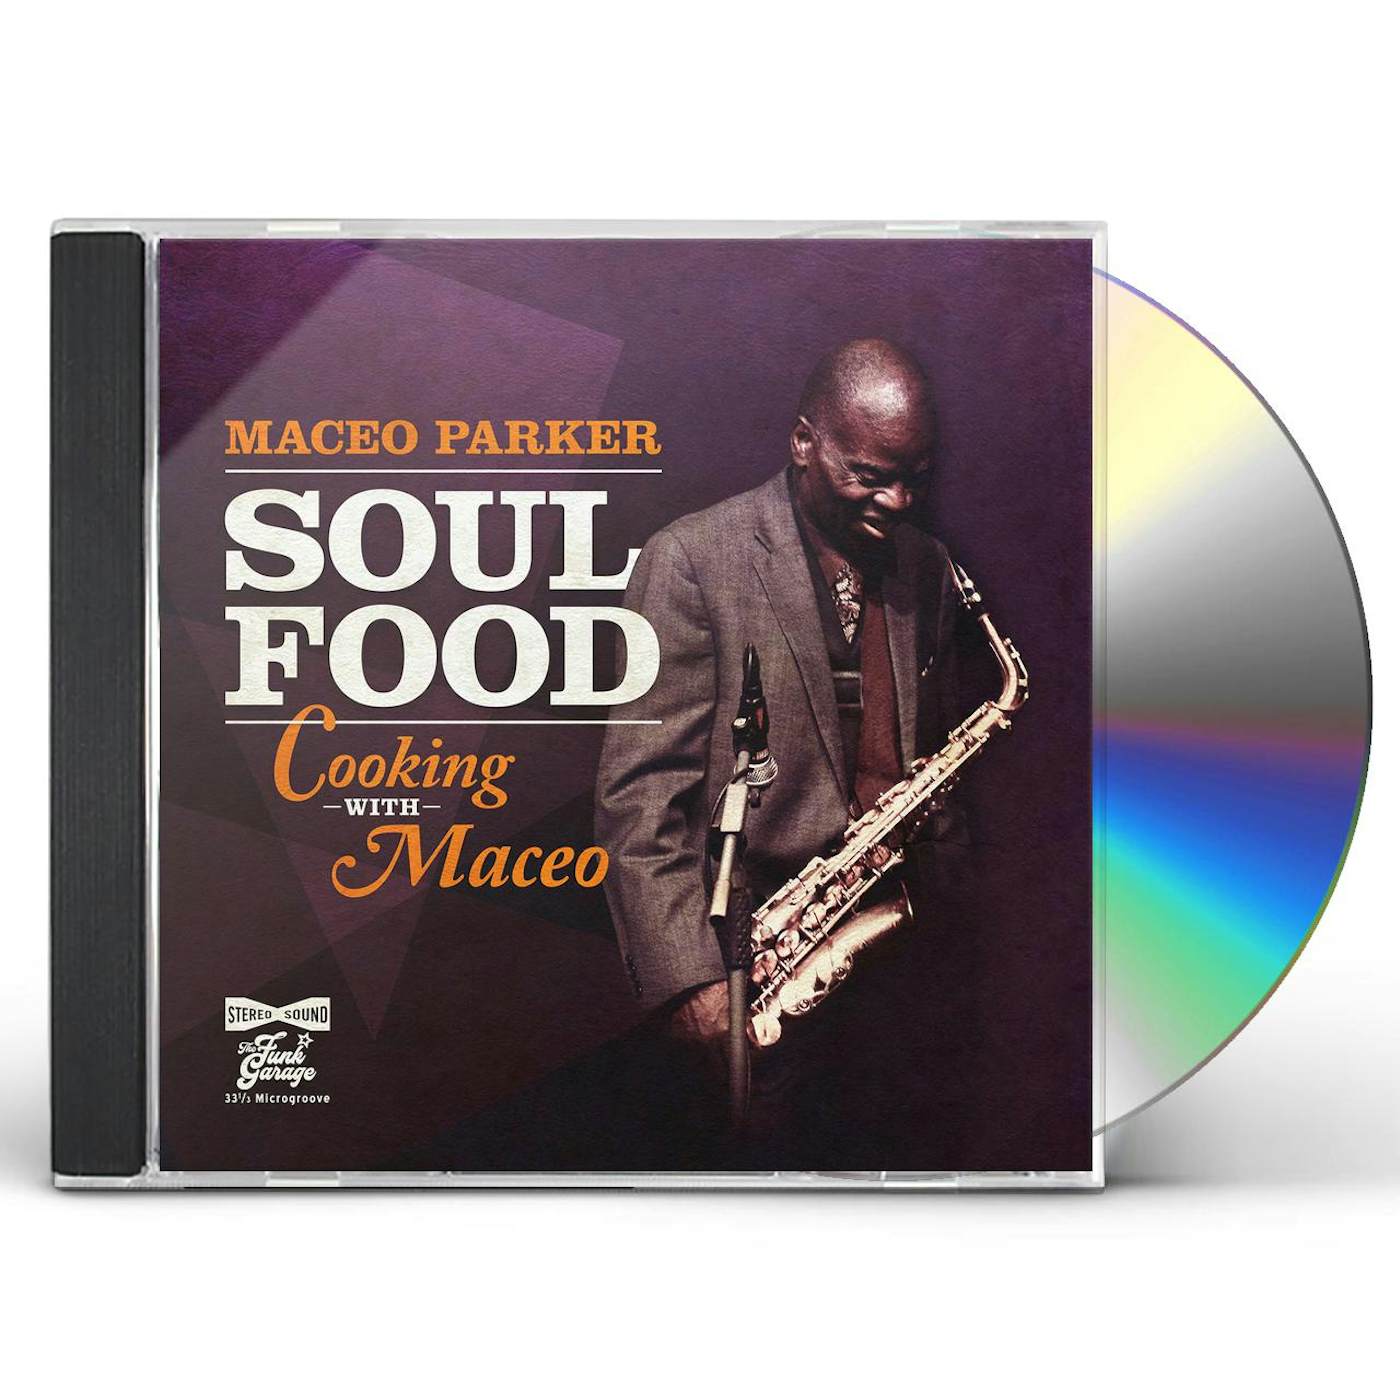 Maceo Parker SOUL FOOD - COOKING WITH MACEO CD